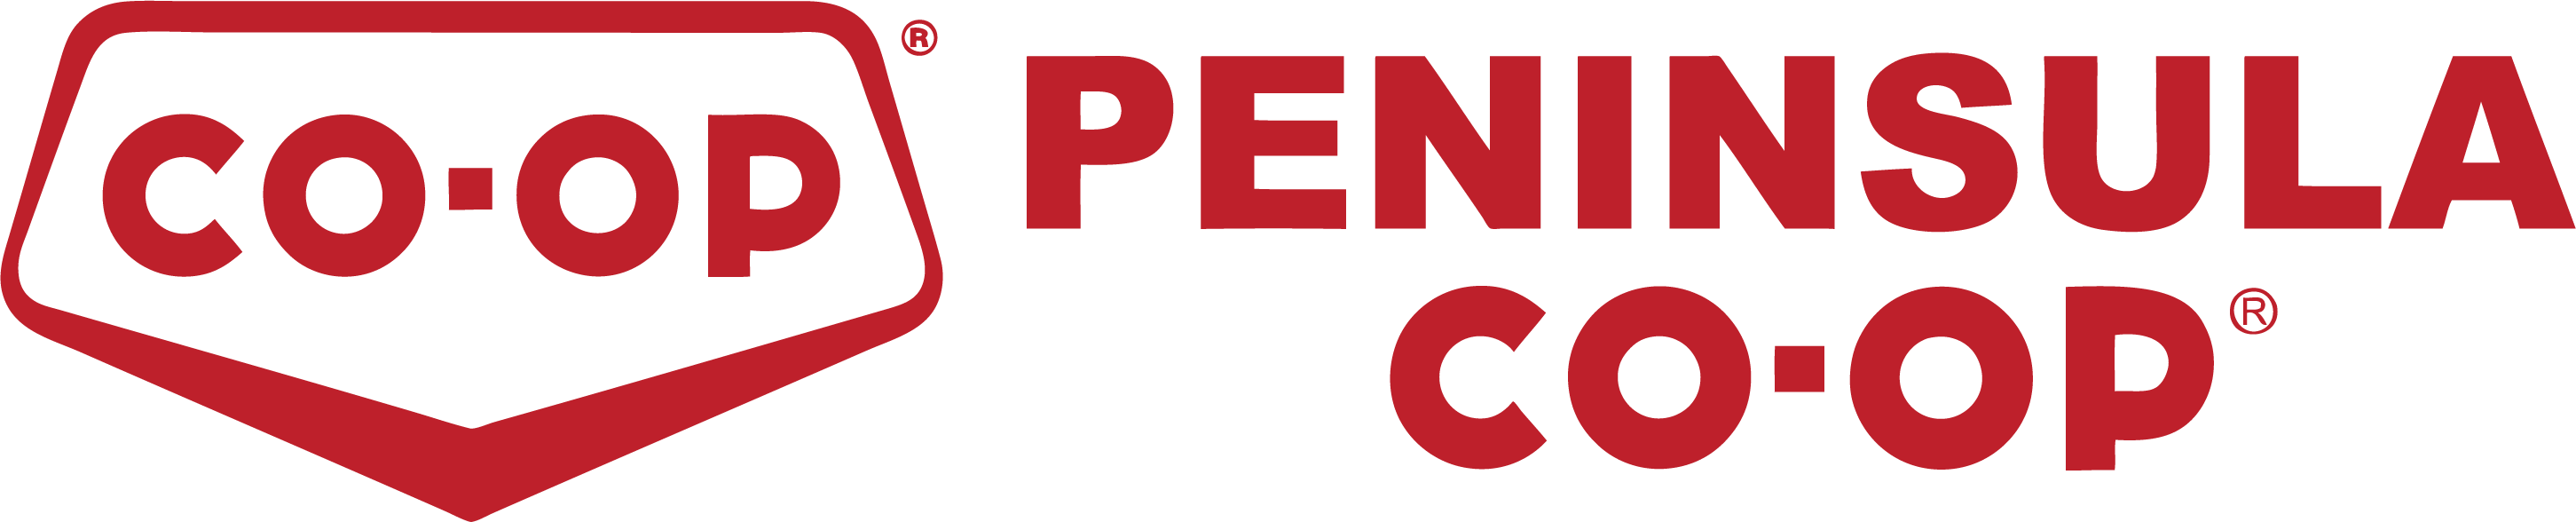 peninsula co-op is one of our supporters